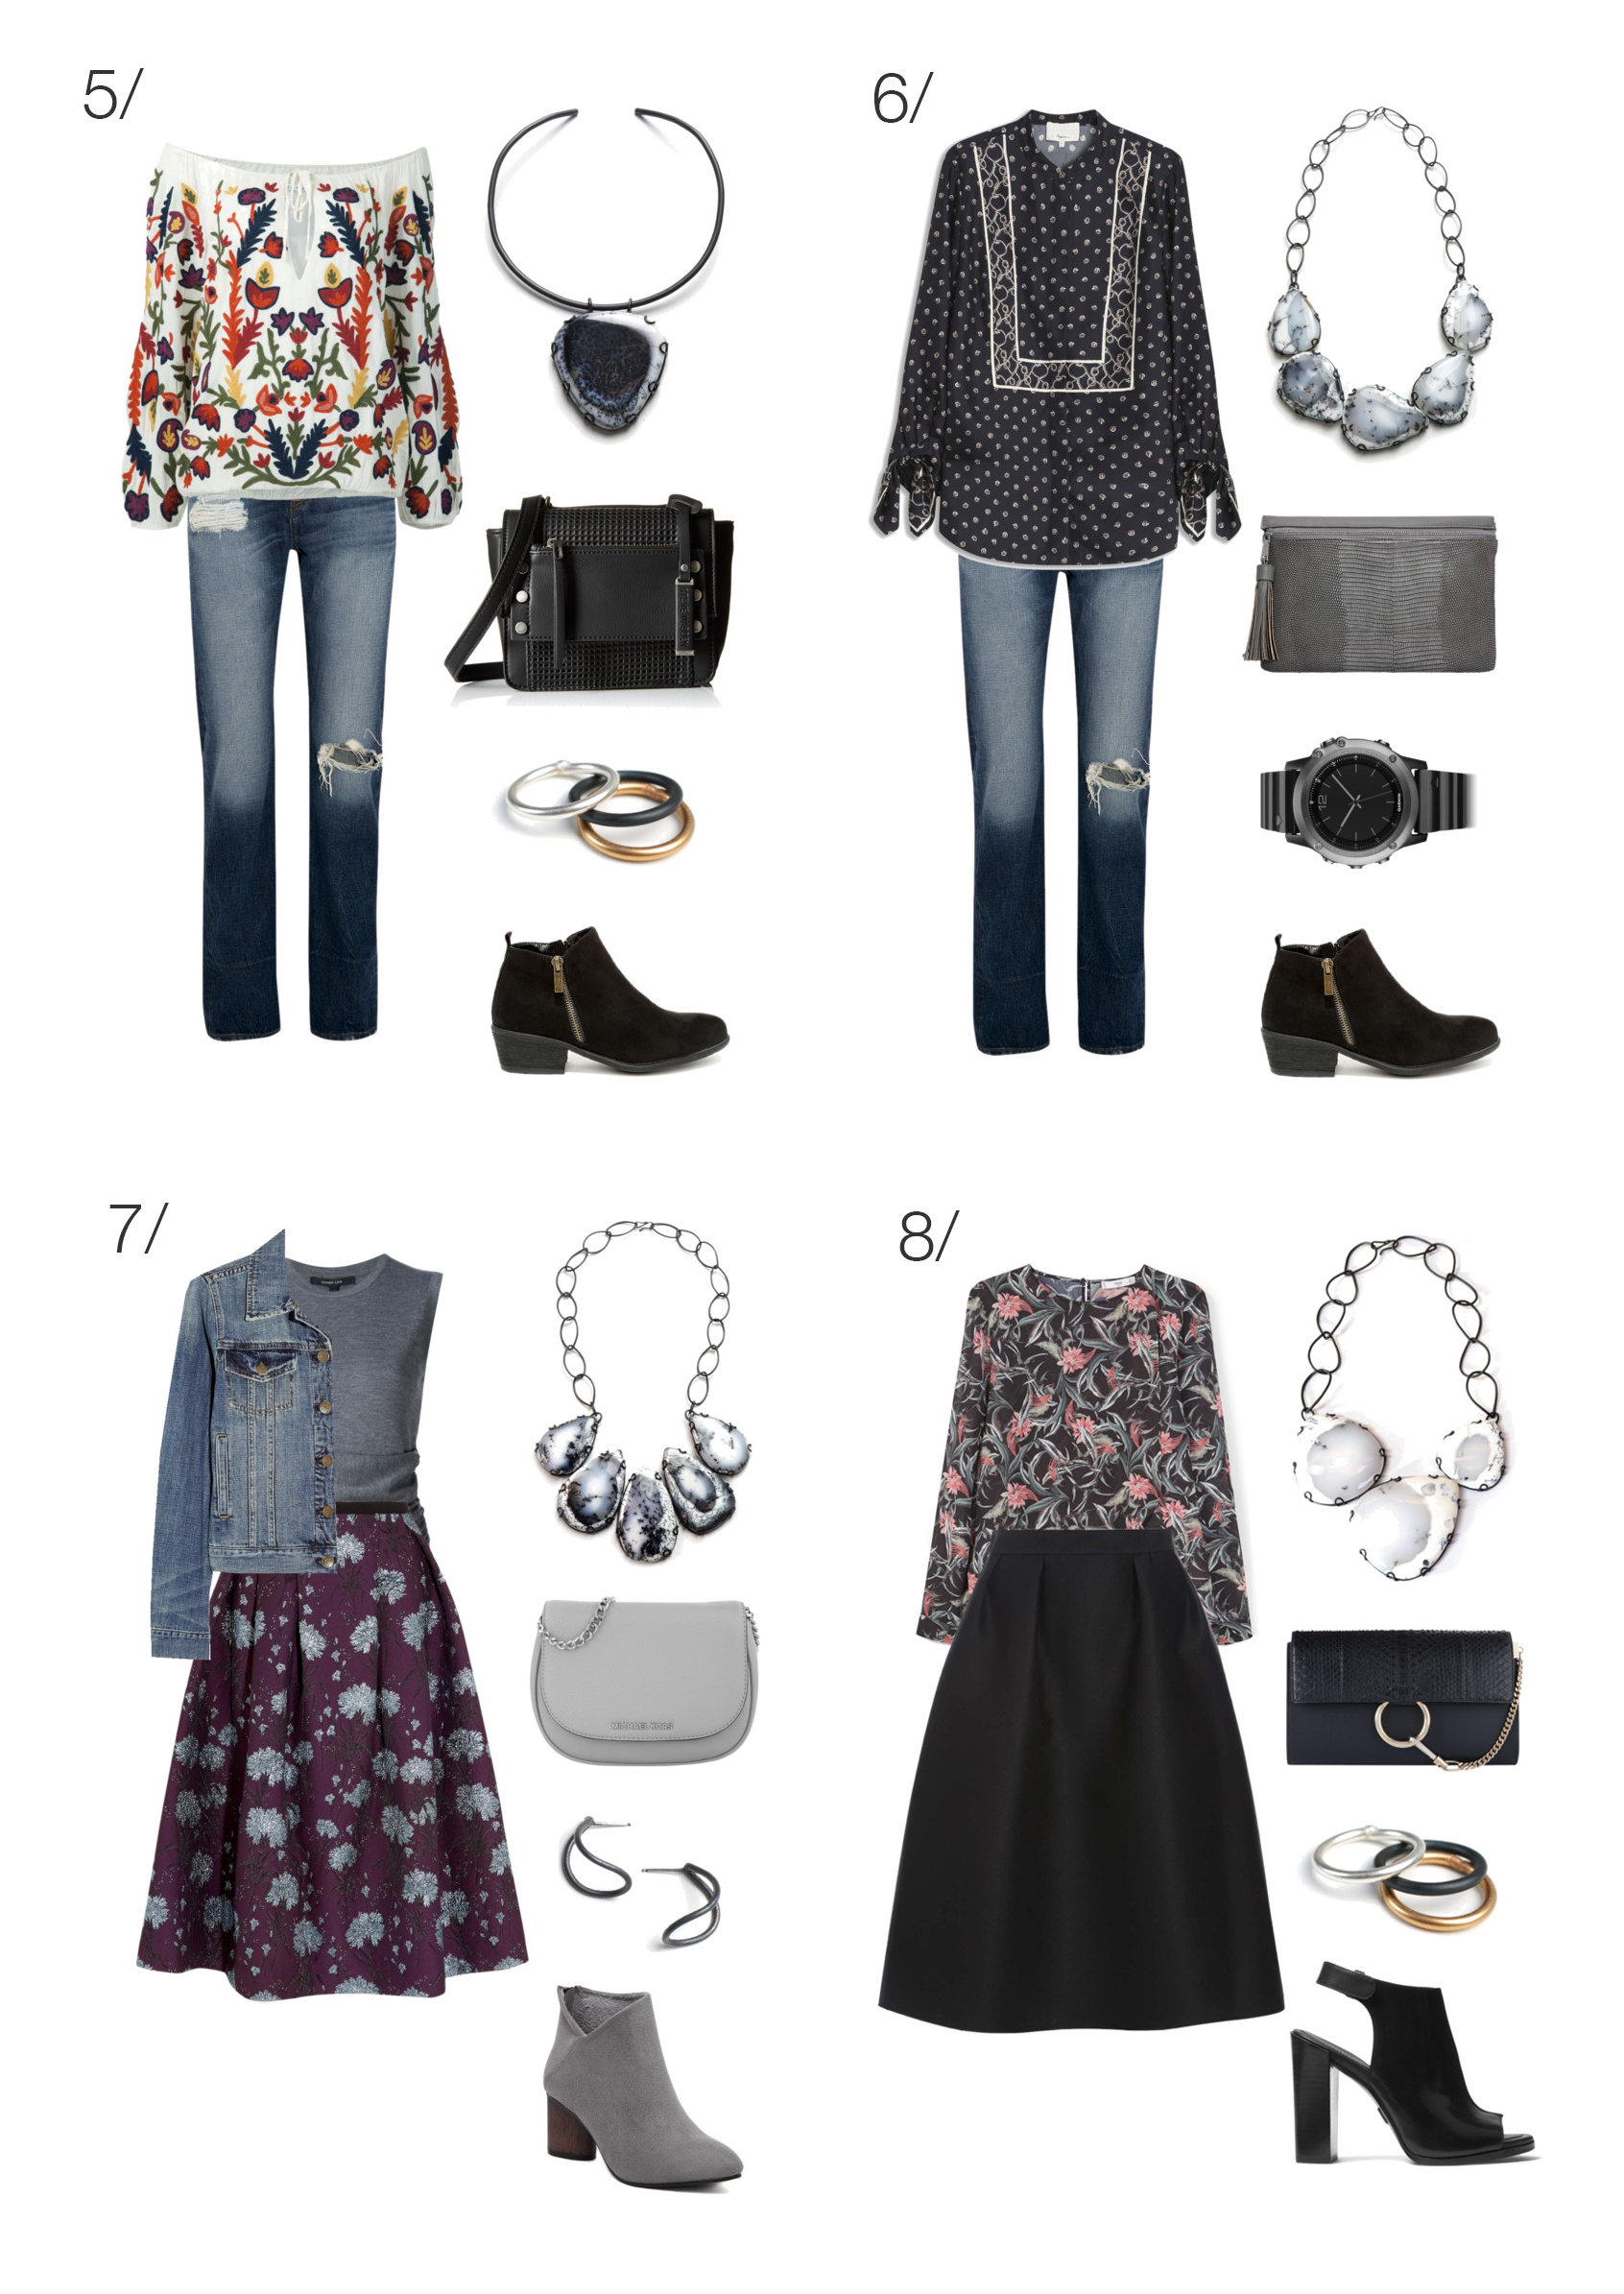 what to wear to Thanksgiving dinner: 8 outfit ideas to try // click through to see all the looks